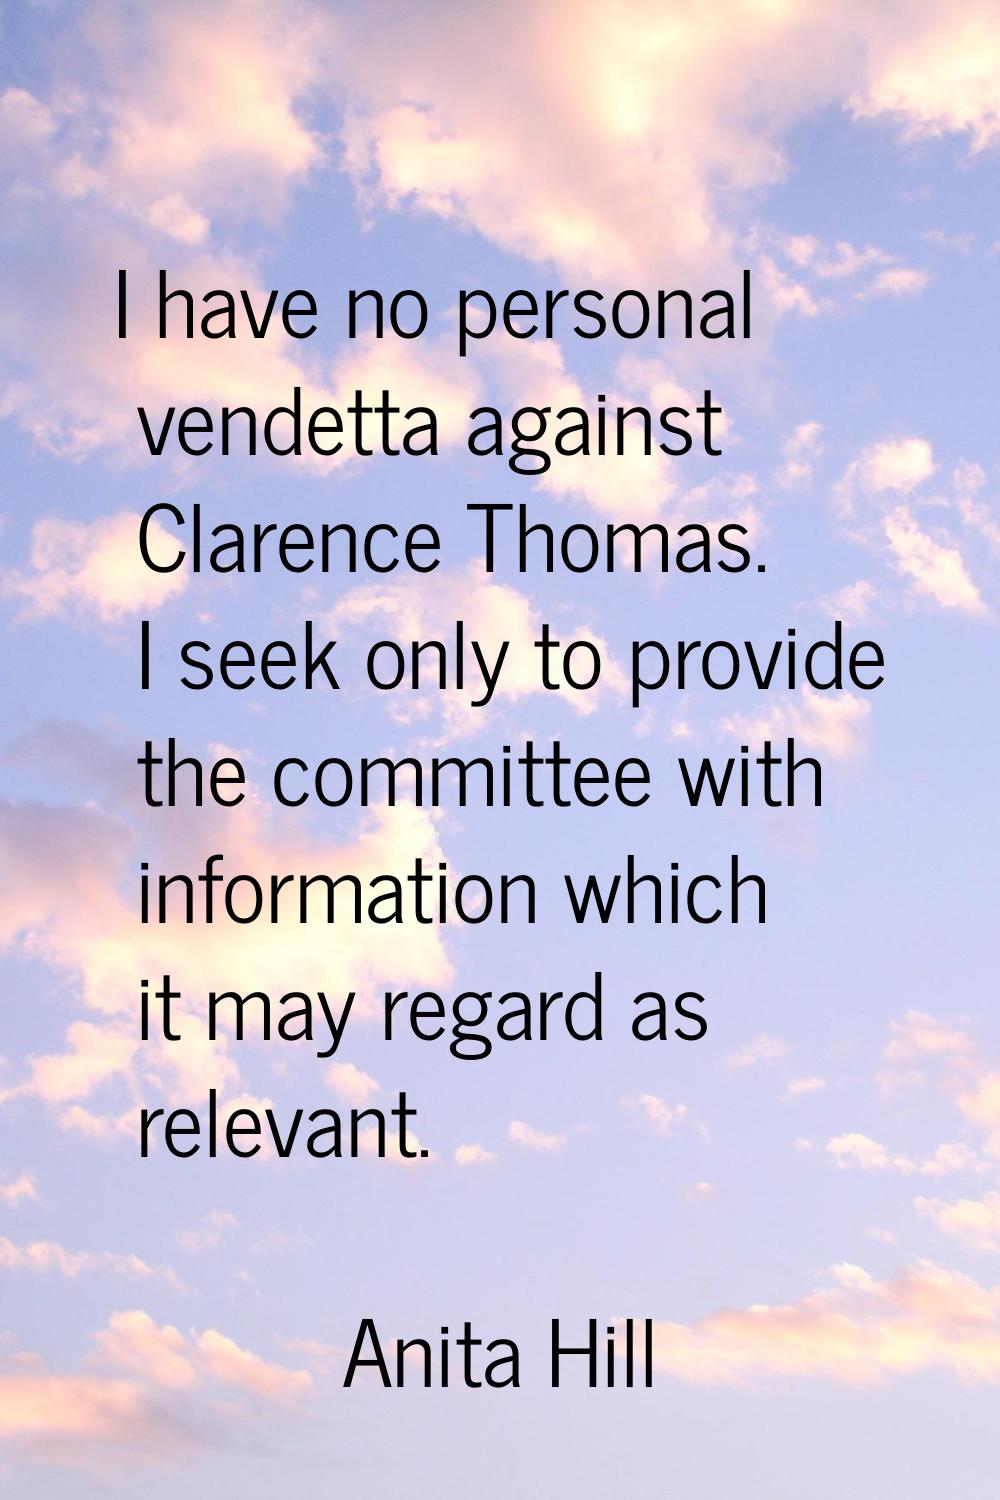 I have no personal vendetta against Clarence Thomas. I seek only to provide the committee with info